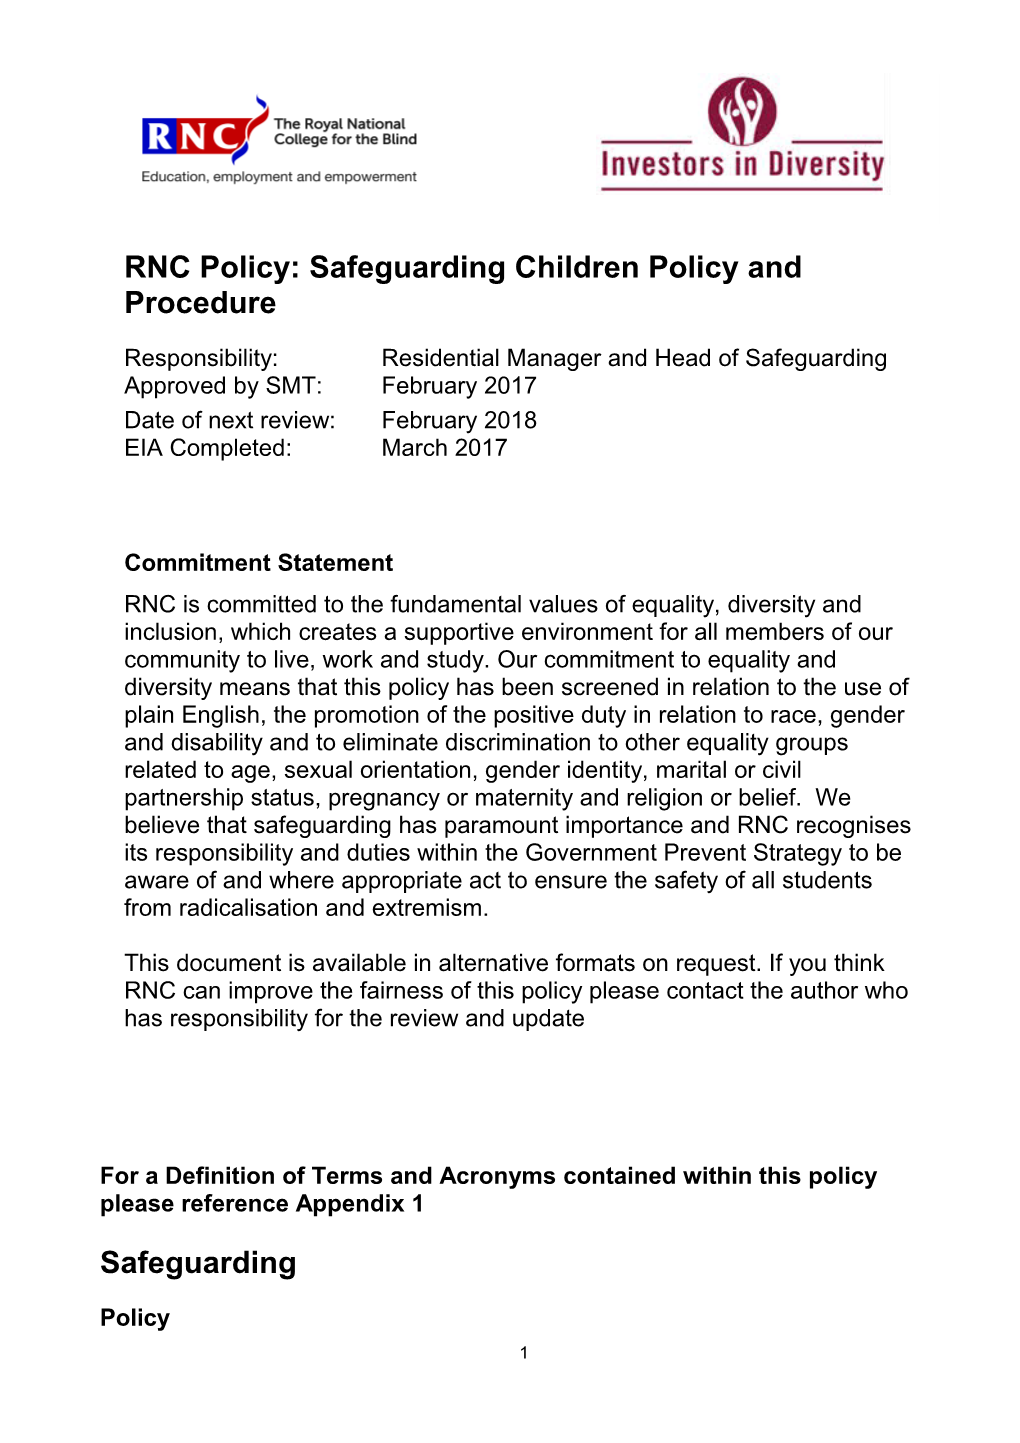 RNC Policy: Safeguarding Children Policy and Procedure